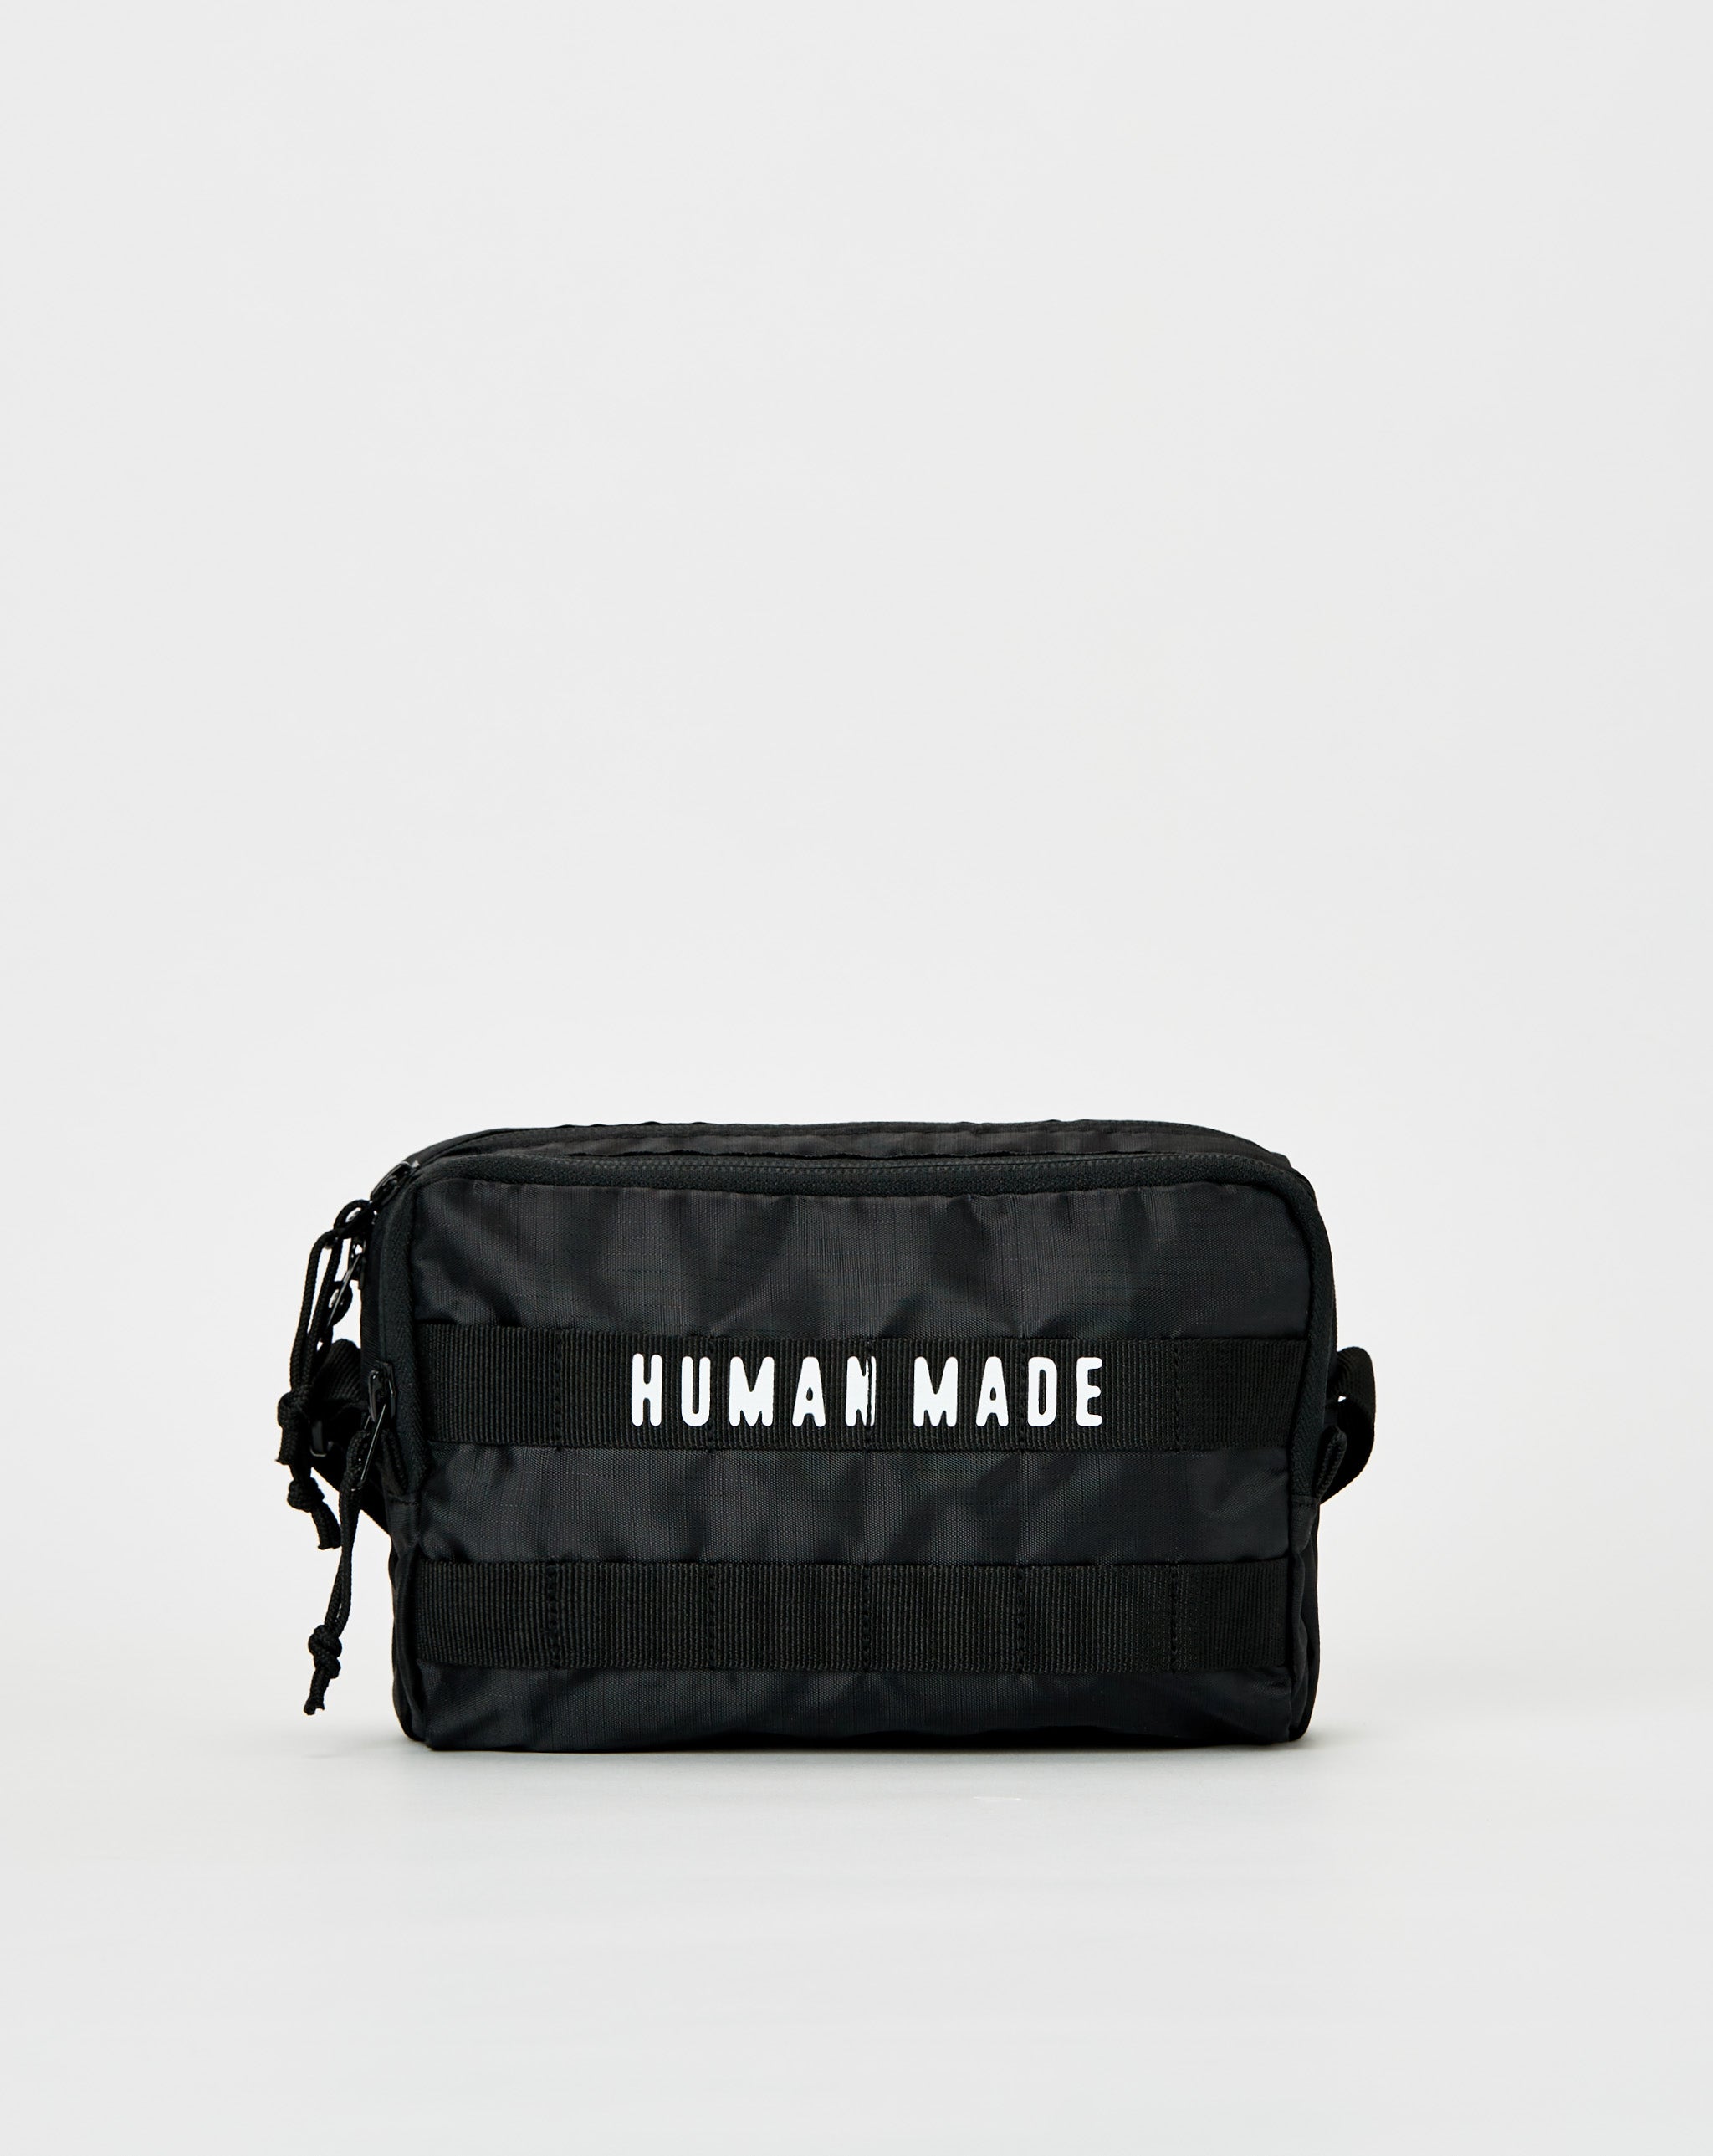 Human Made Backpack COCCINELLE M5F Coccinellemaelody E1 M5F 14 01 01 Silk Y87  - Cheap Cerbe Jordan outlet